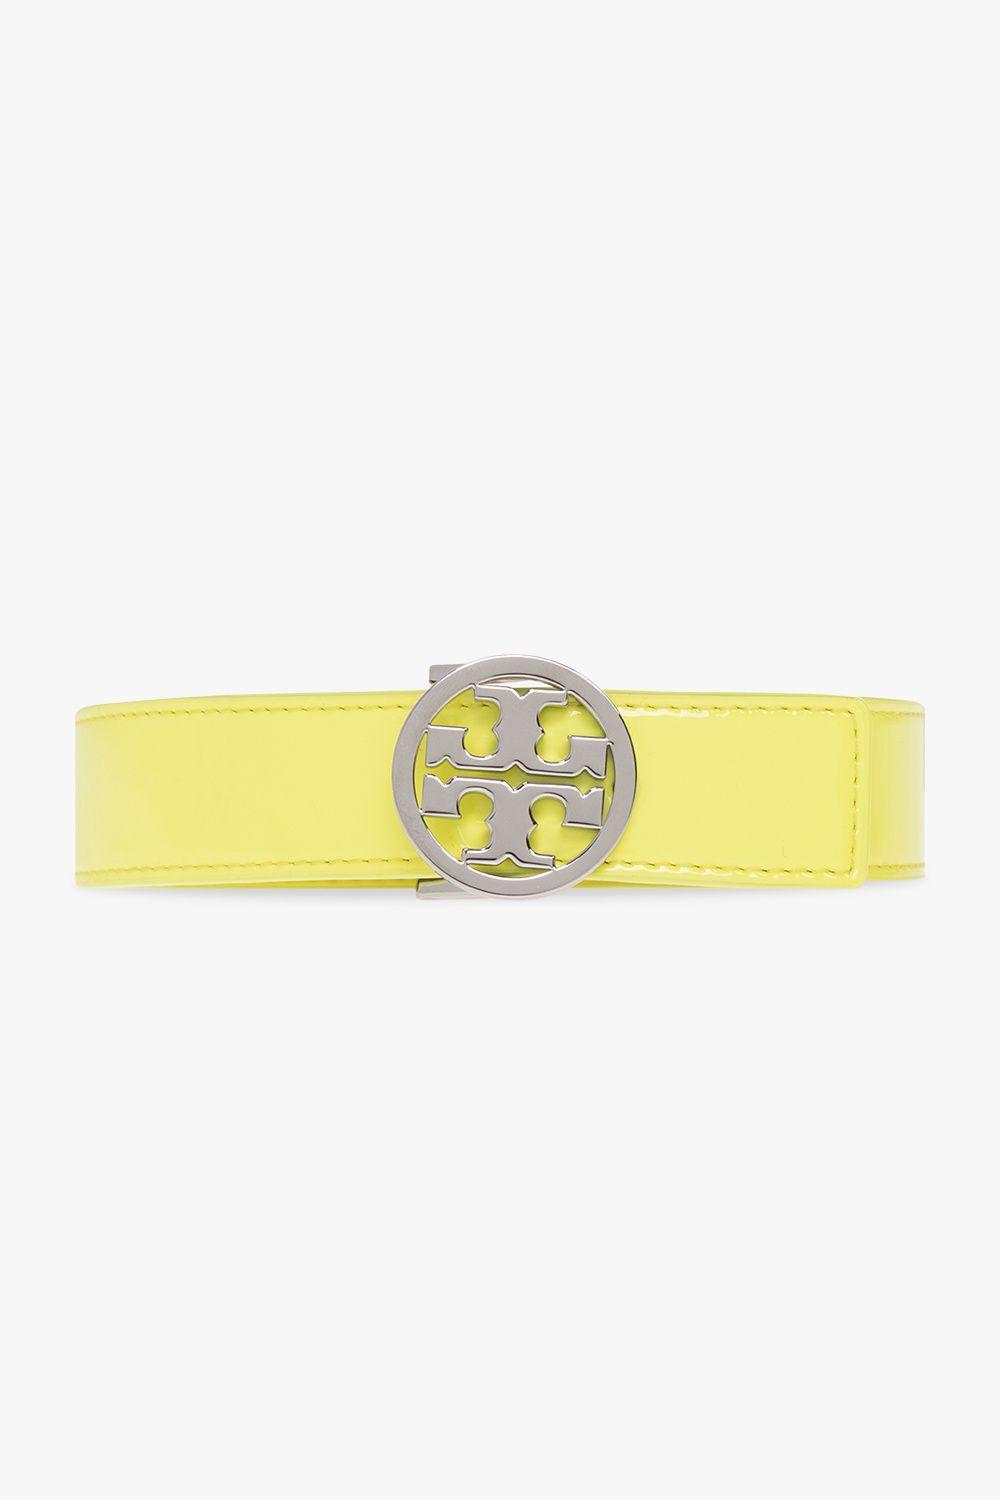 Tory Burch Belt In Patent Leather in Yellow | Lyst